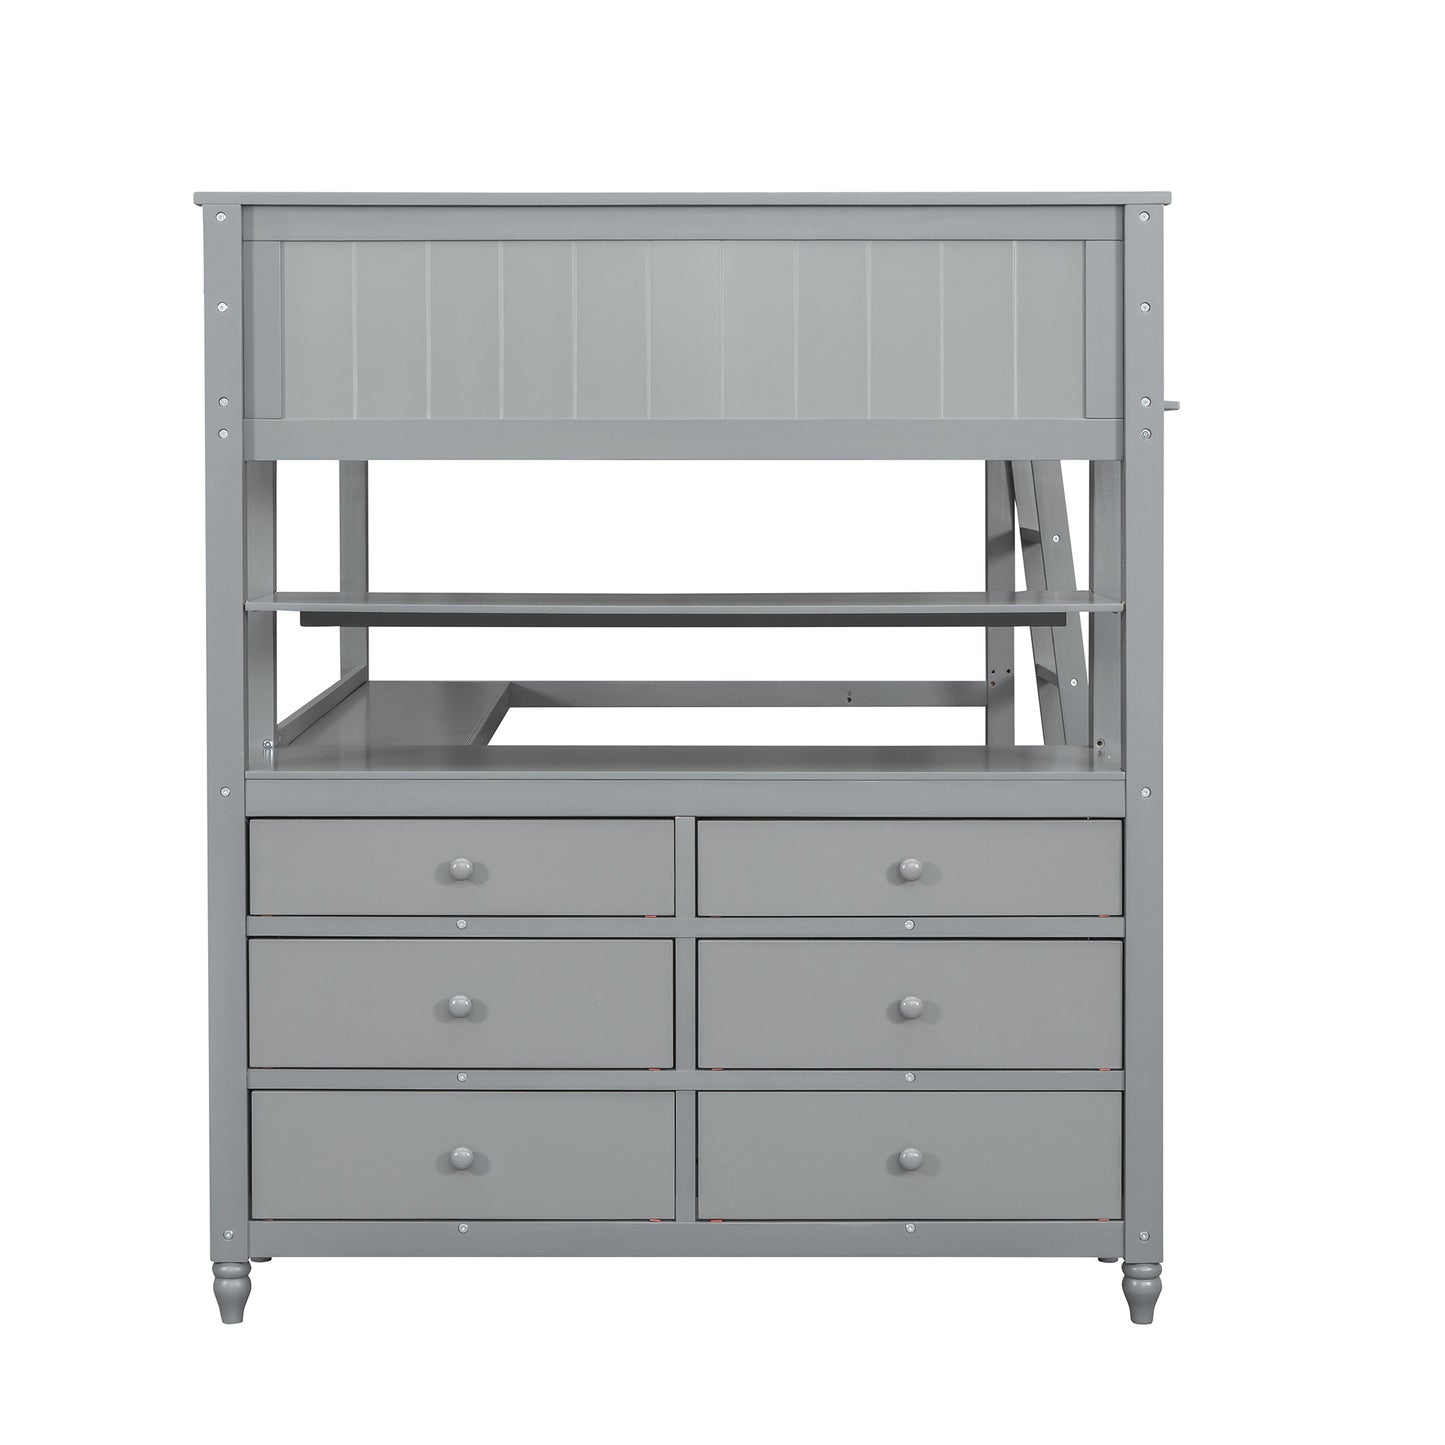 Full size Loft Bed with Drawers and Desk, Wooden Loft Bed with Shelves - Gray